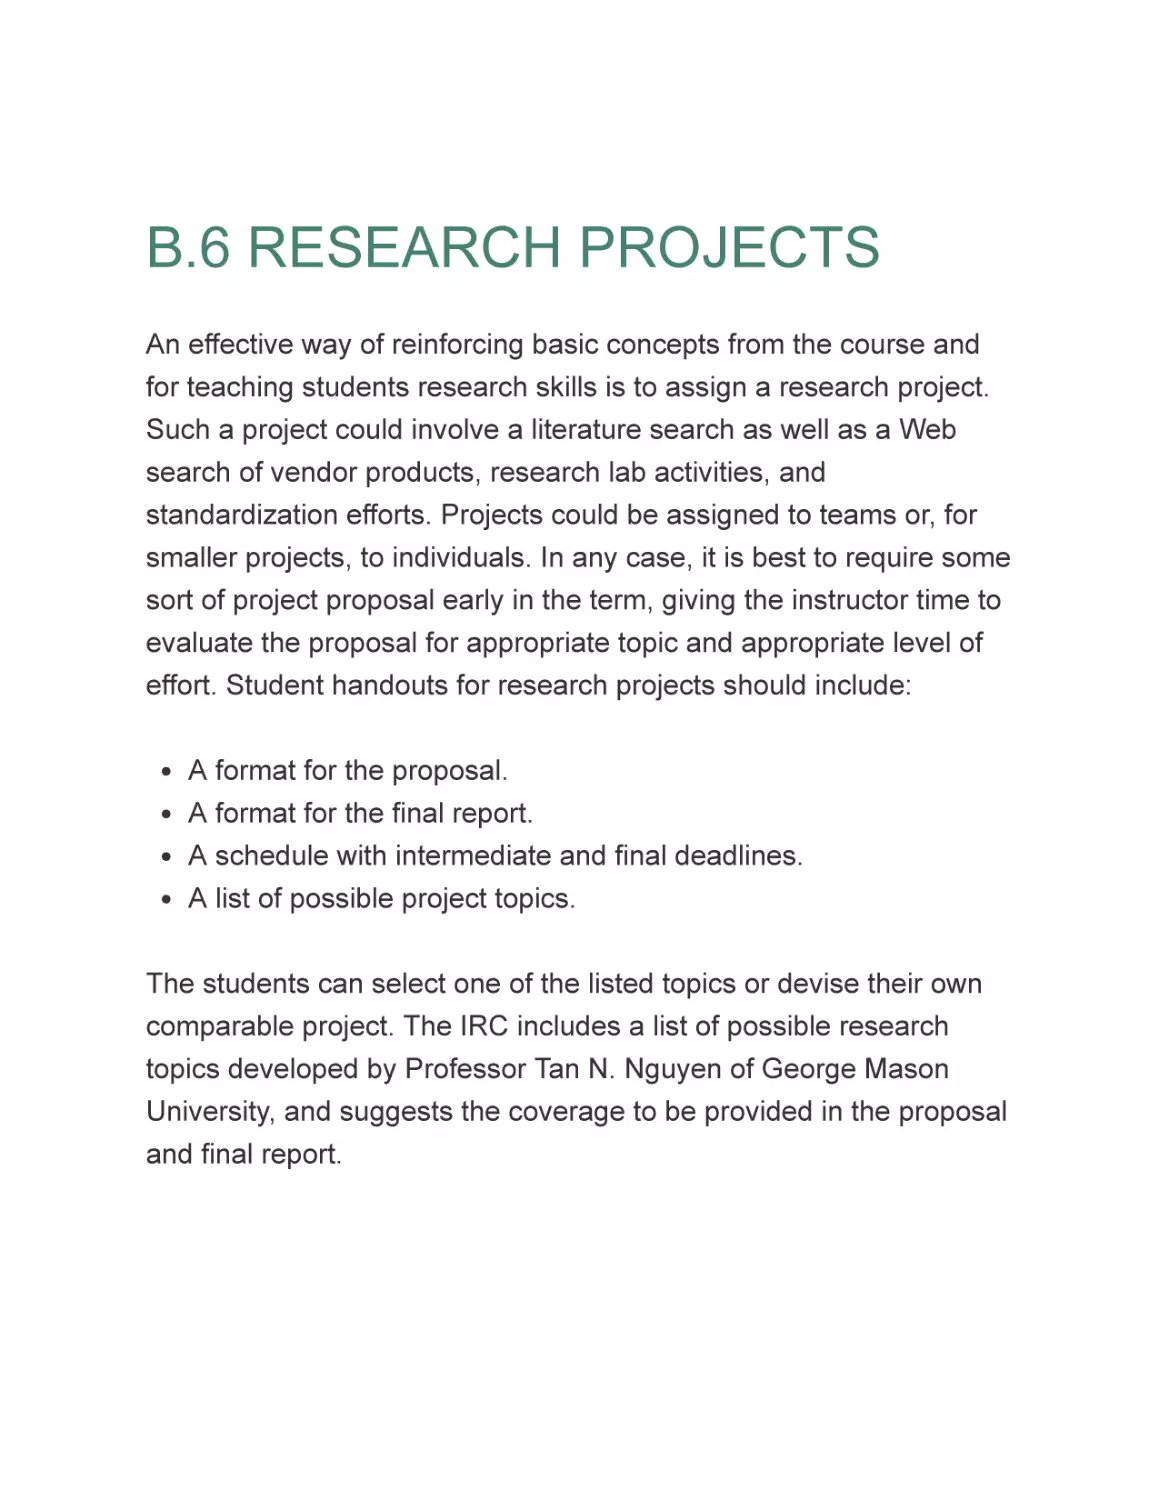 B.6 RESEARCH PROJECTS